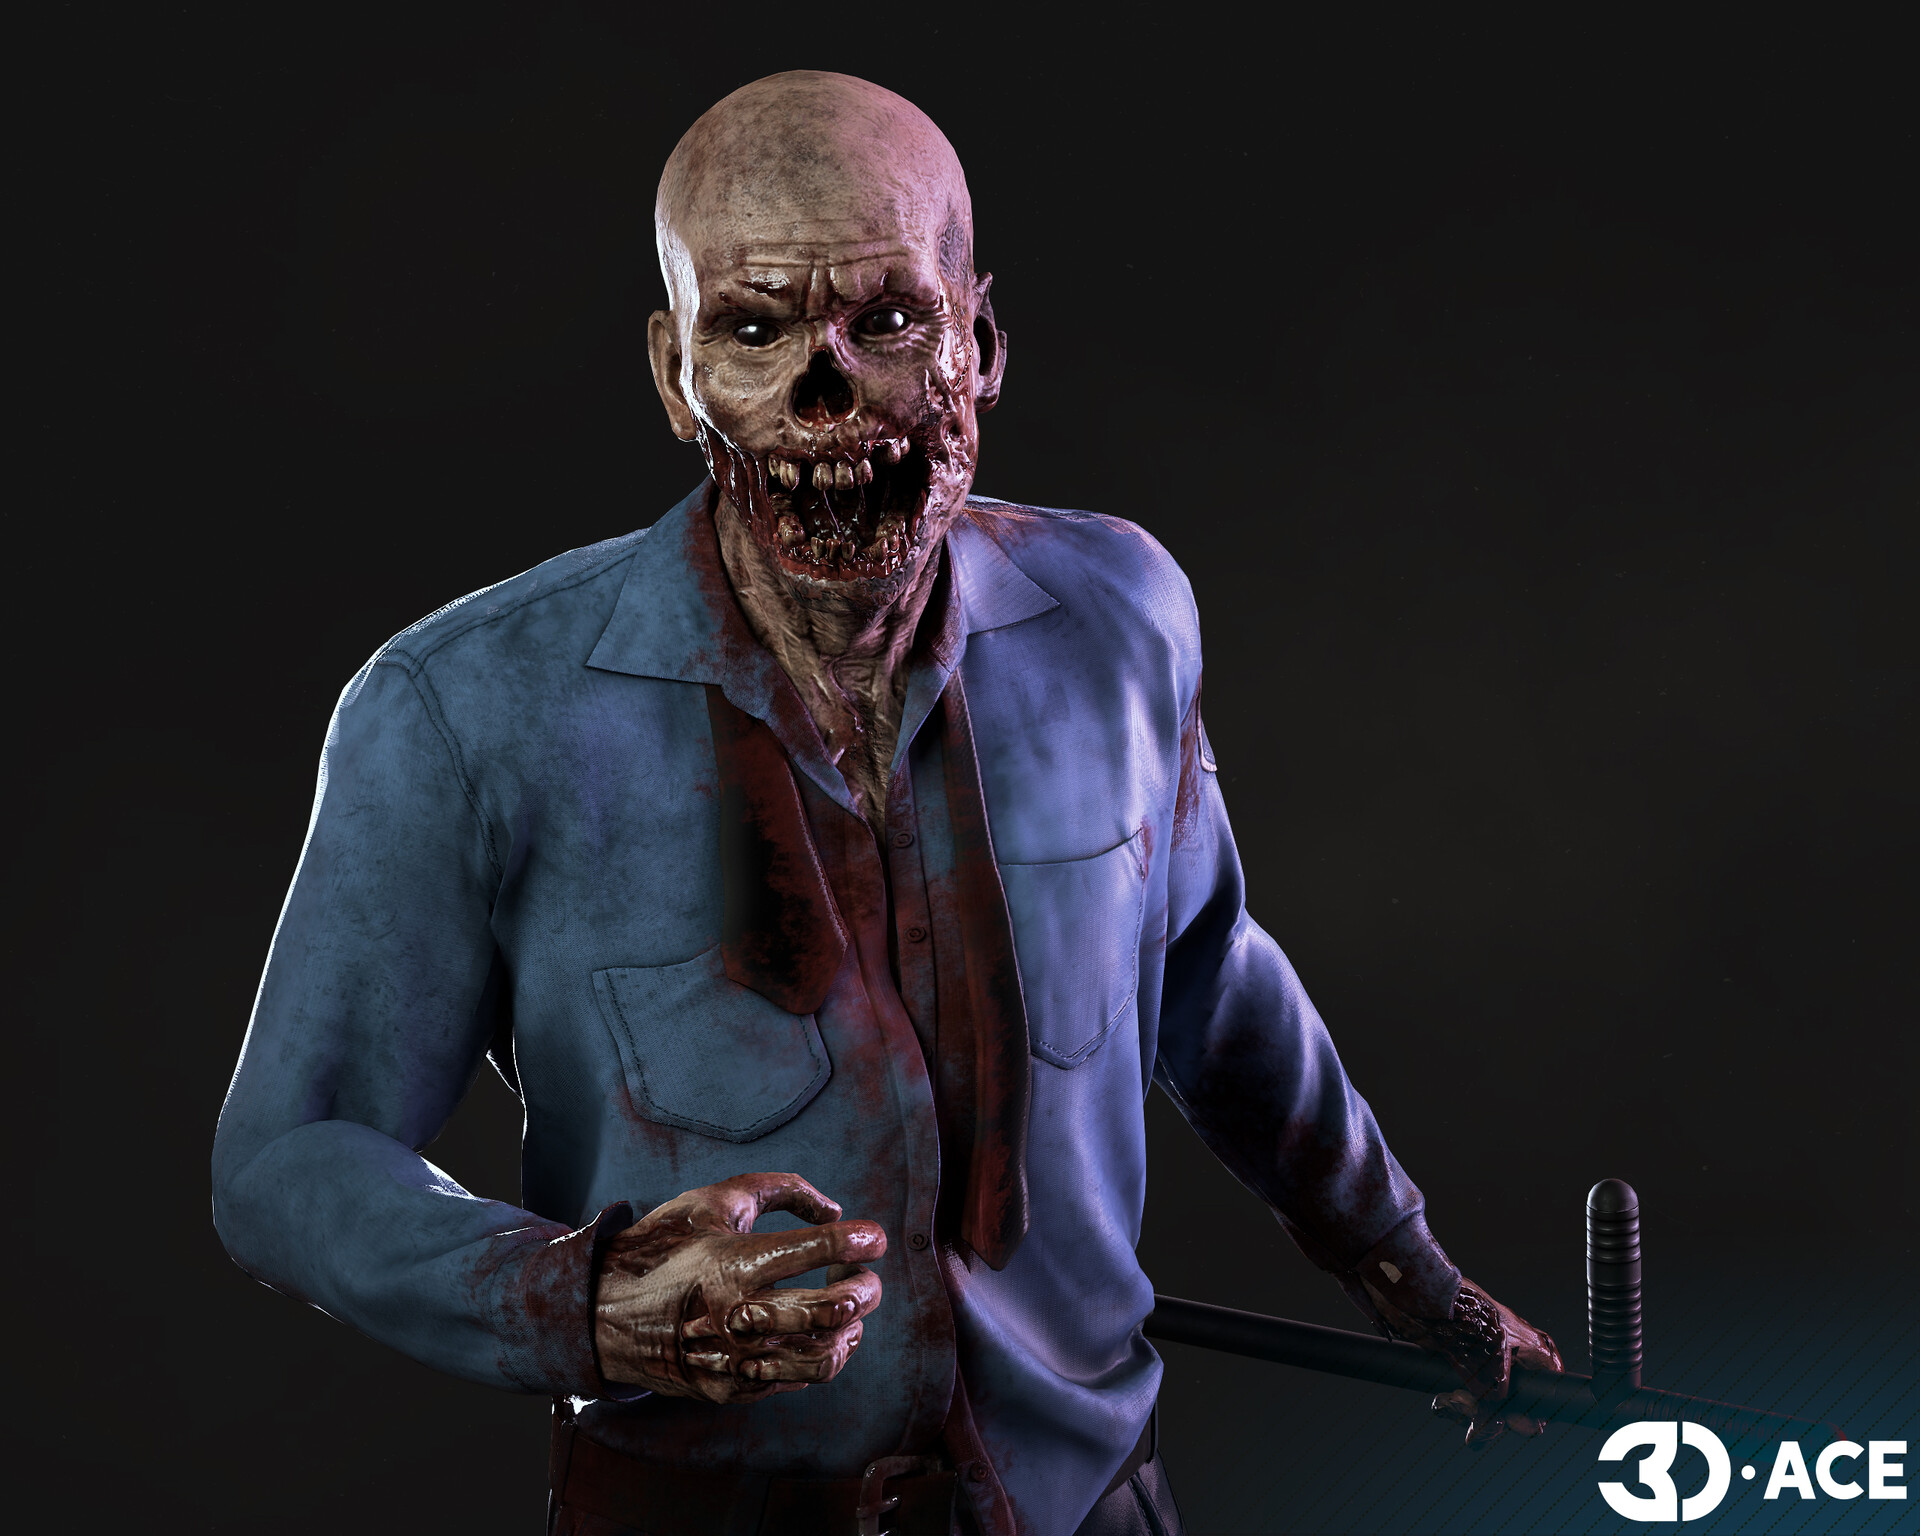 Zombie security guard for UE 4 project